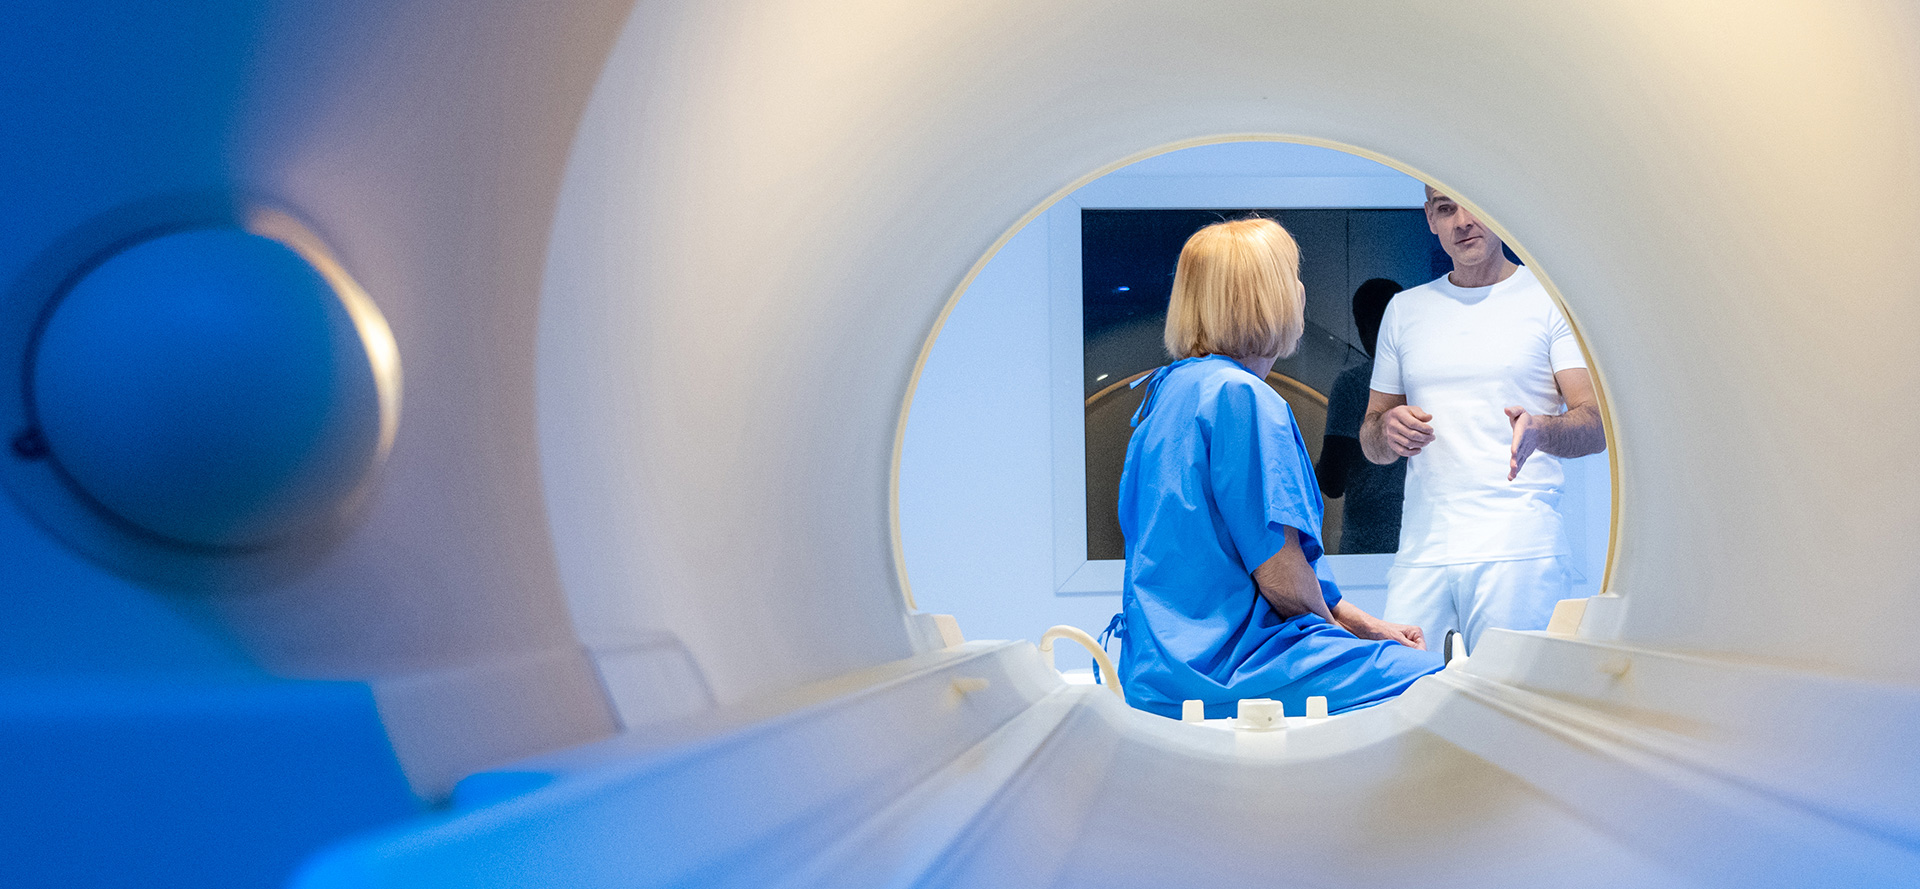 A look inside an MRI scanner with a patient and a doctor talking outside of the MRI scanner